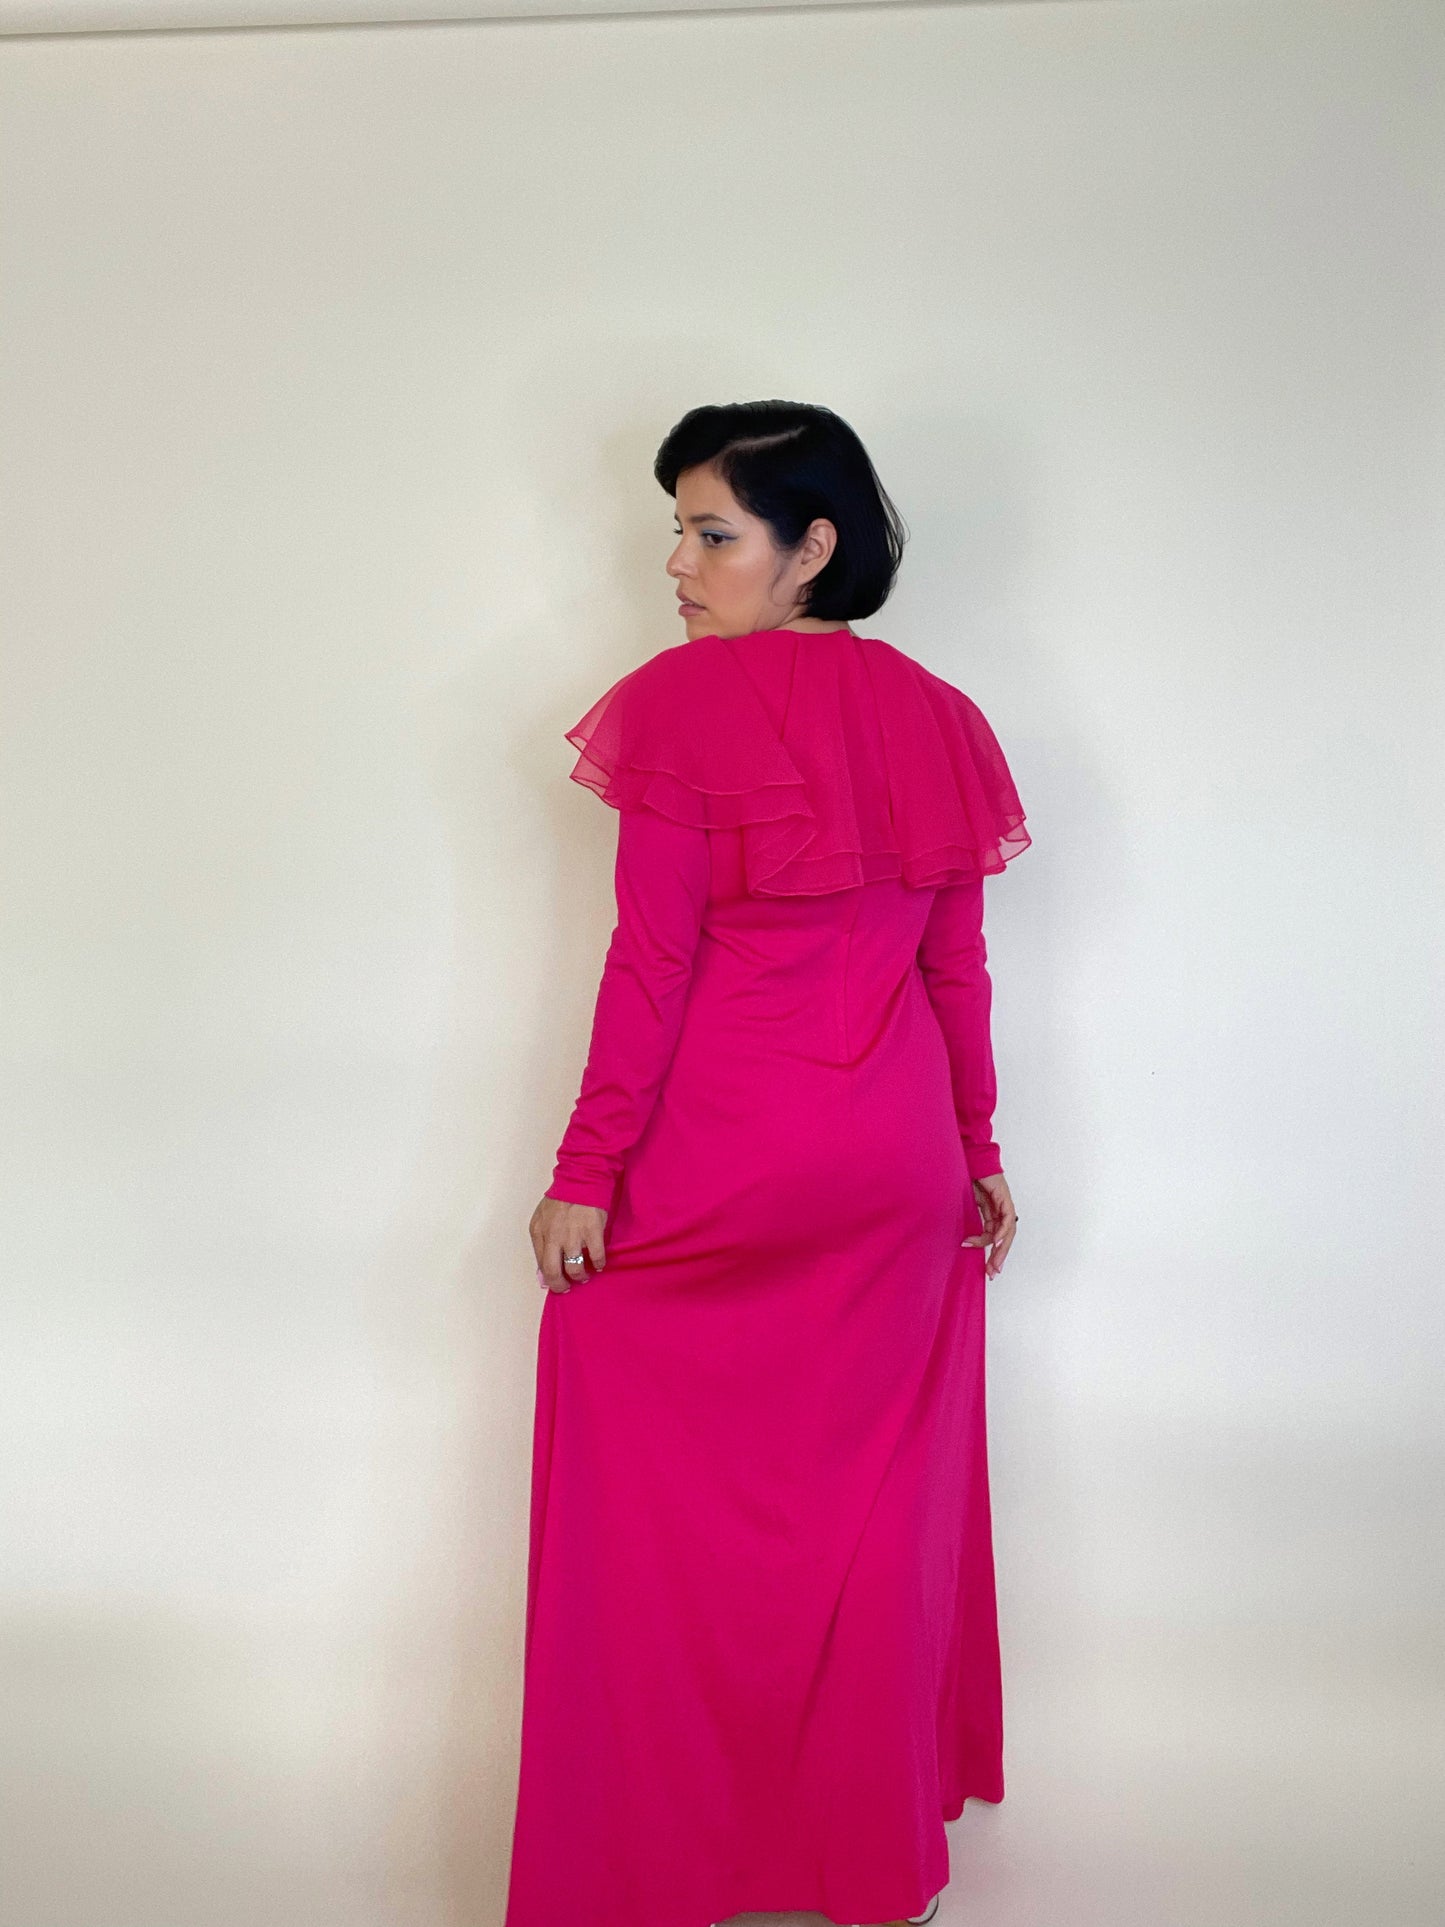 Vintage 1960s / 1970s Stretchy Hot Pink Slinky Ruffle Collar 3-D Flower Maxi Dress Fits Sizes XS-L